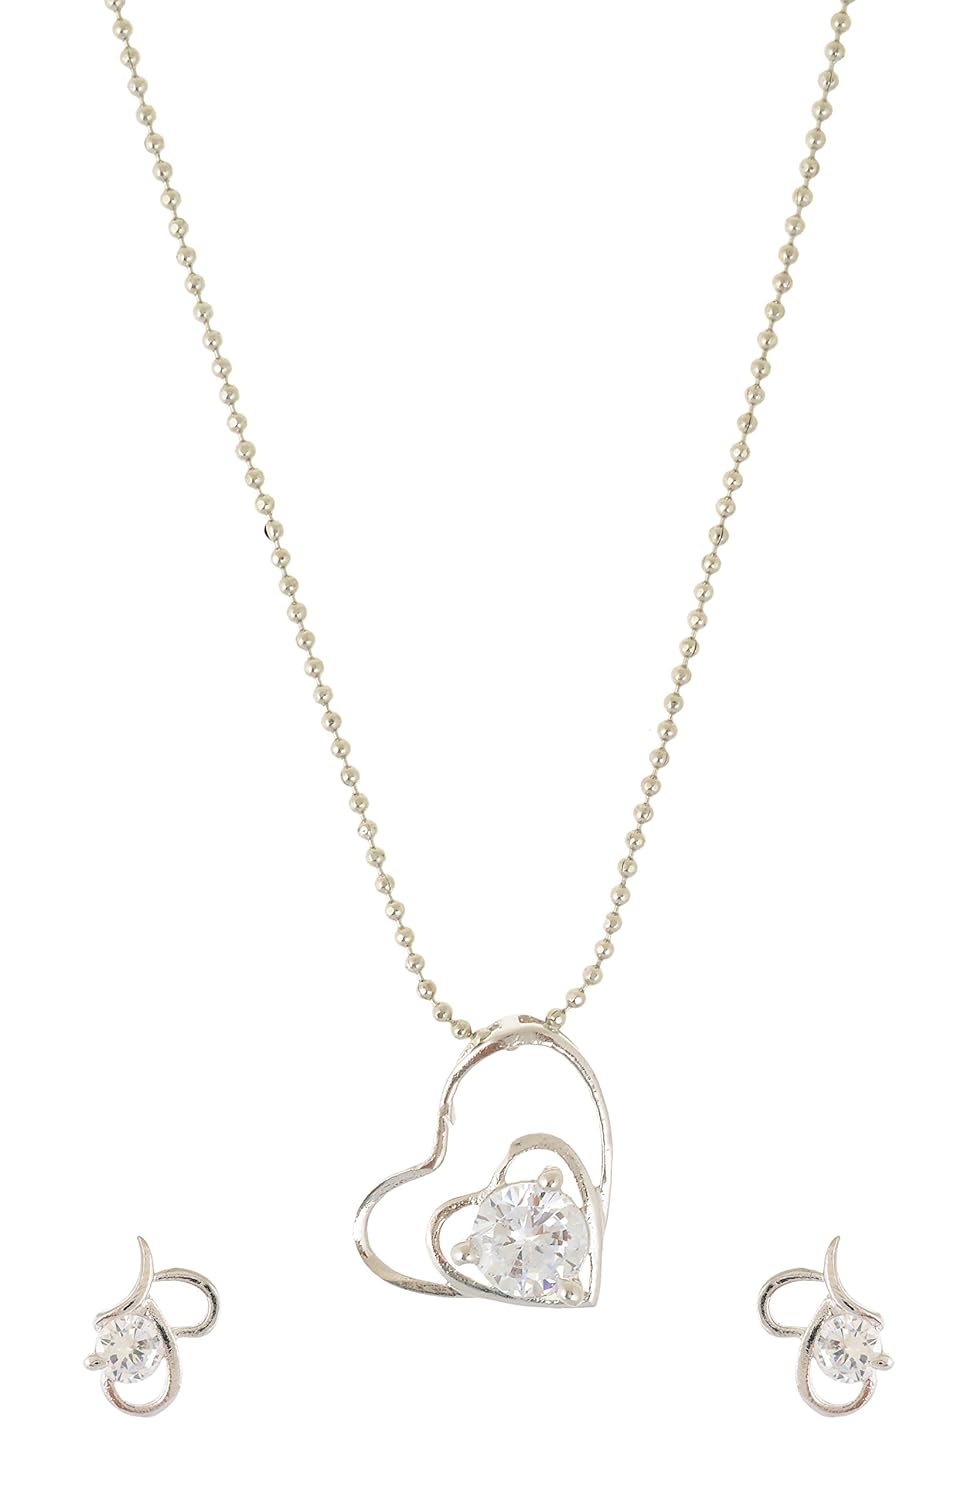 Silver Heart Pendant Set with Chain | Silver Metal American Diamond CZ Heart Pendant with Chain for Women